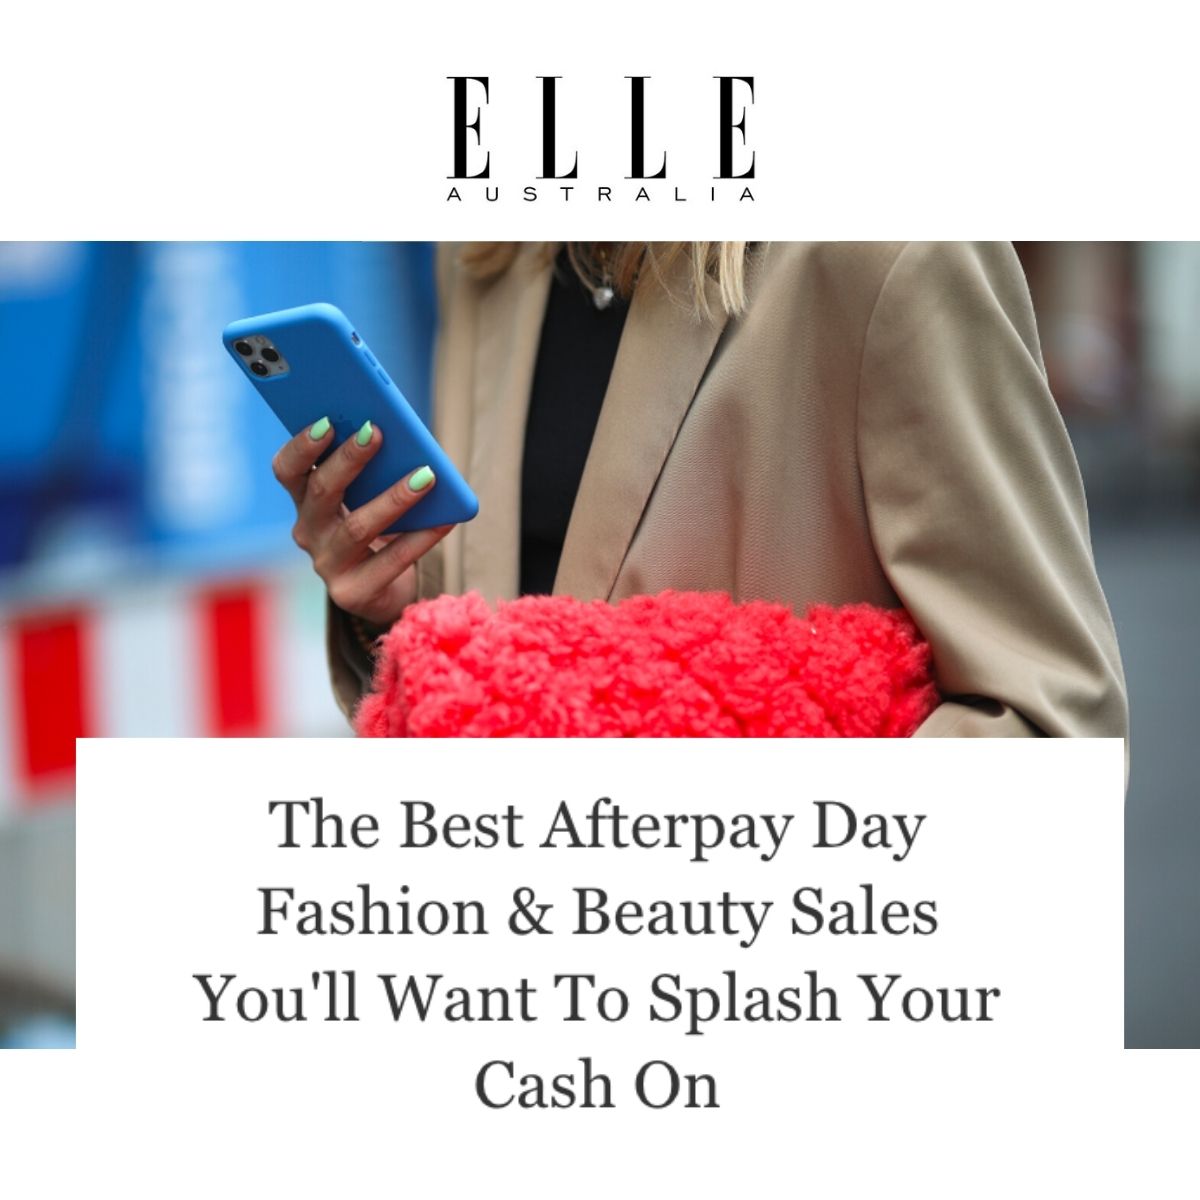 The Best Afterpay Day Fashion & Beauty Sales You'll Want To Splash Your Cash On